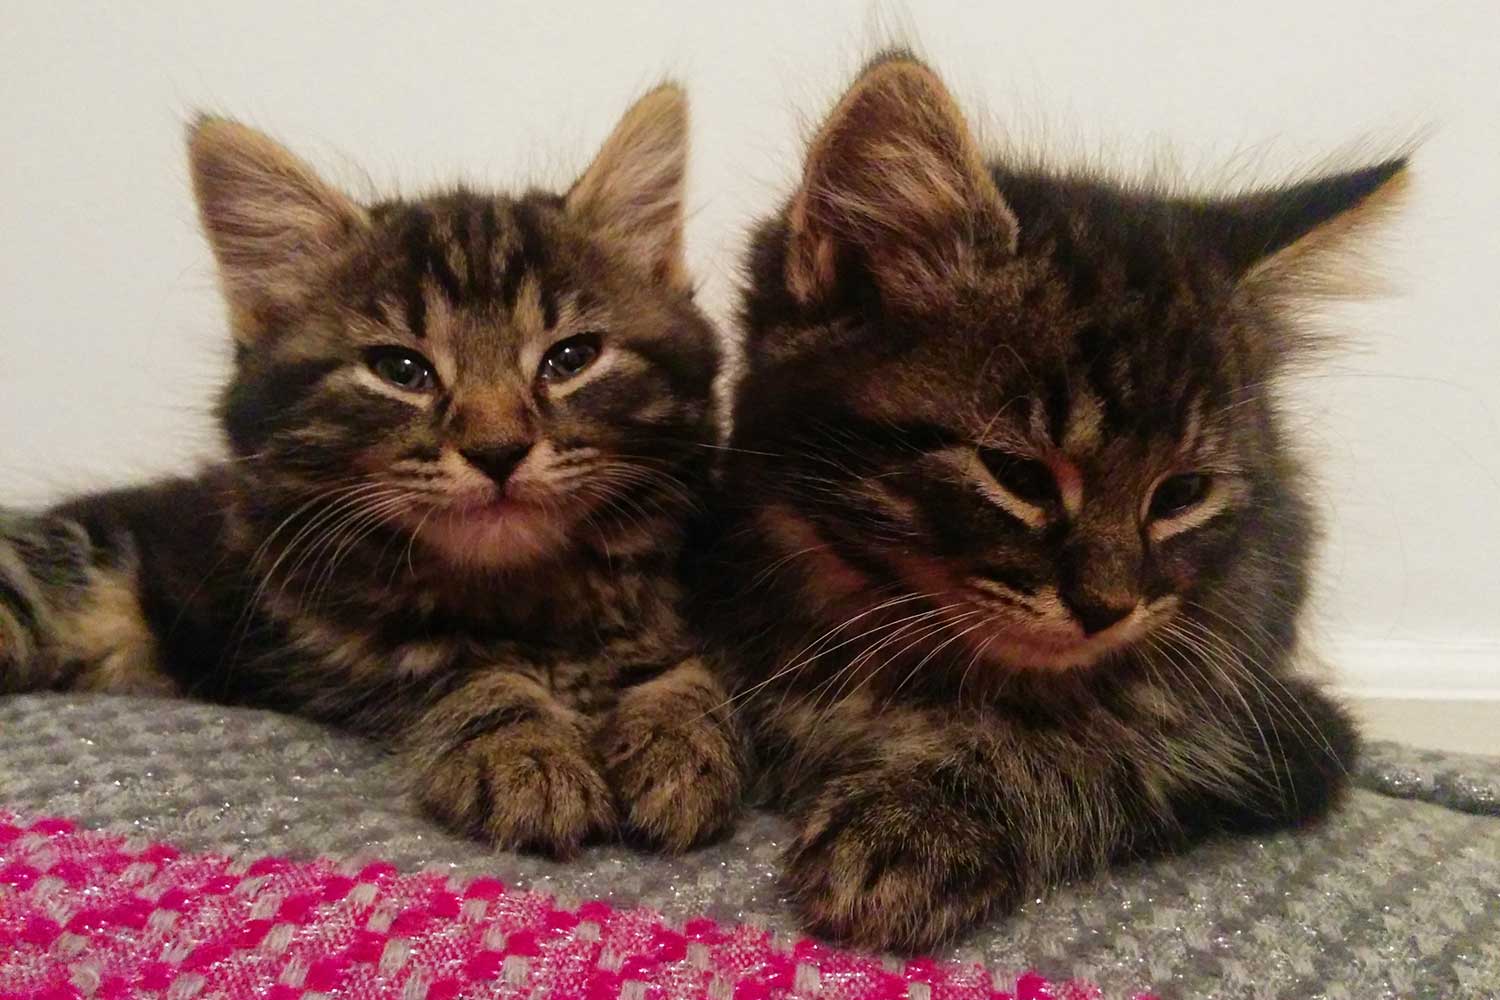 Lias and Little Puss: two ten-week-old grey tabby kittens